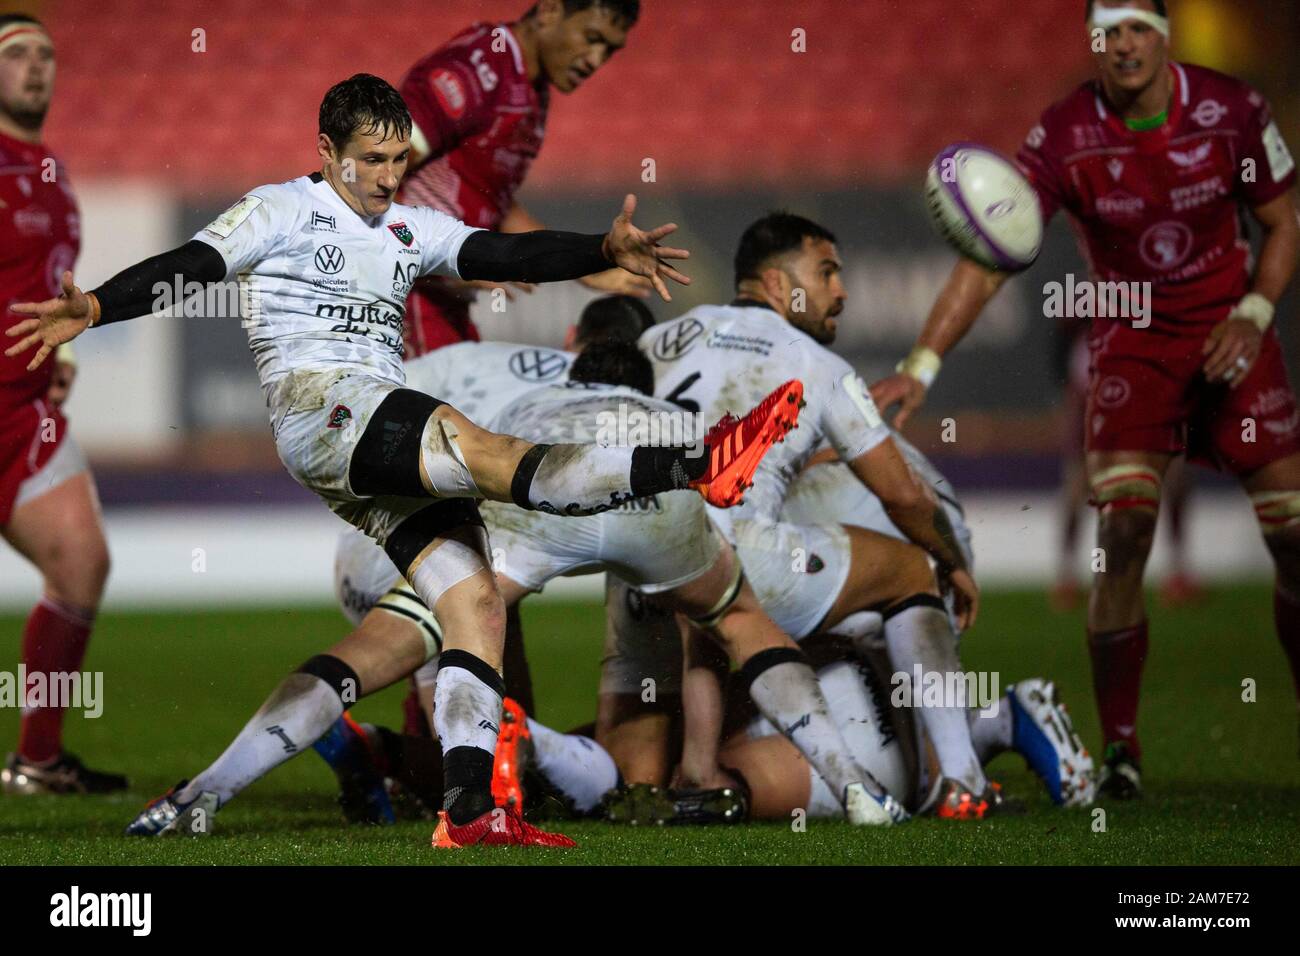 Llanelli, UK. 11 January, 2020. Toulon scrum half Baptiste Serin kicks the ball in the Scarlets v RC Toulon Challenge Cup Rugby Match. Credit: Gruffydd Ll. Thomas/Alamy Live News Stock Photo